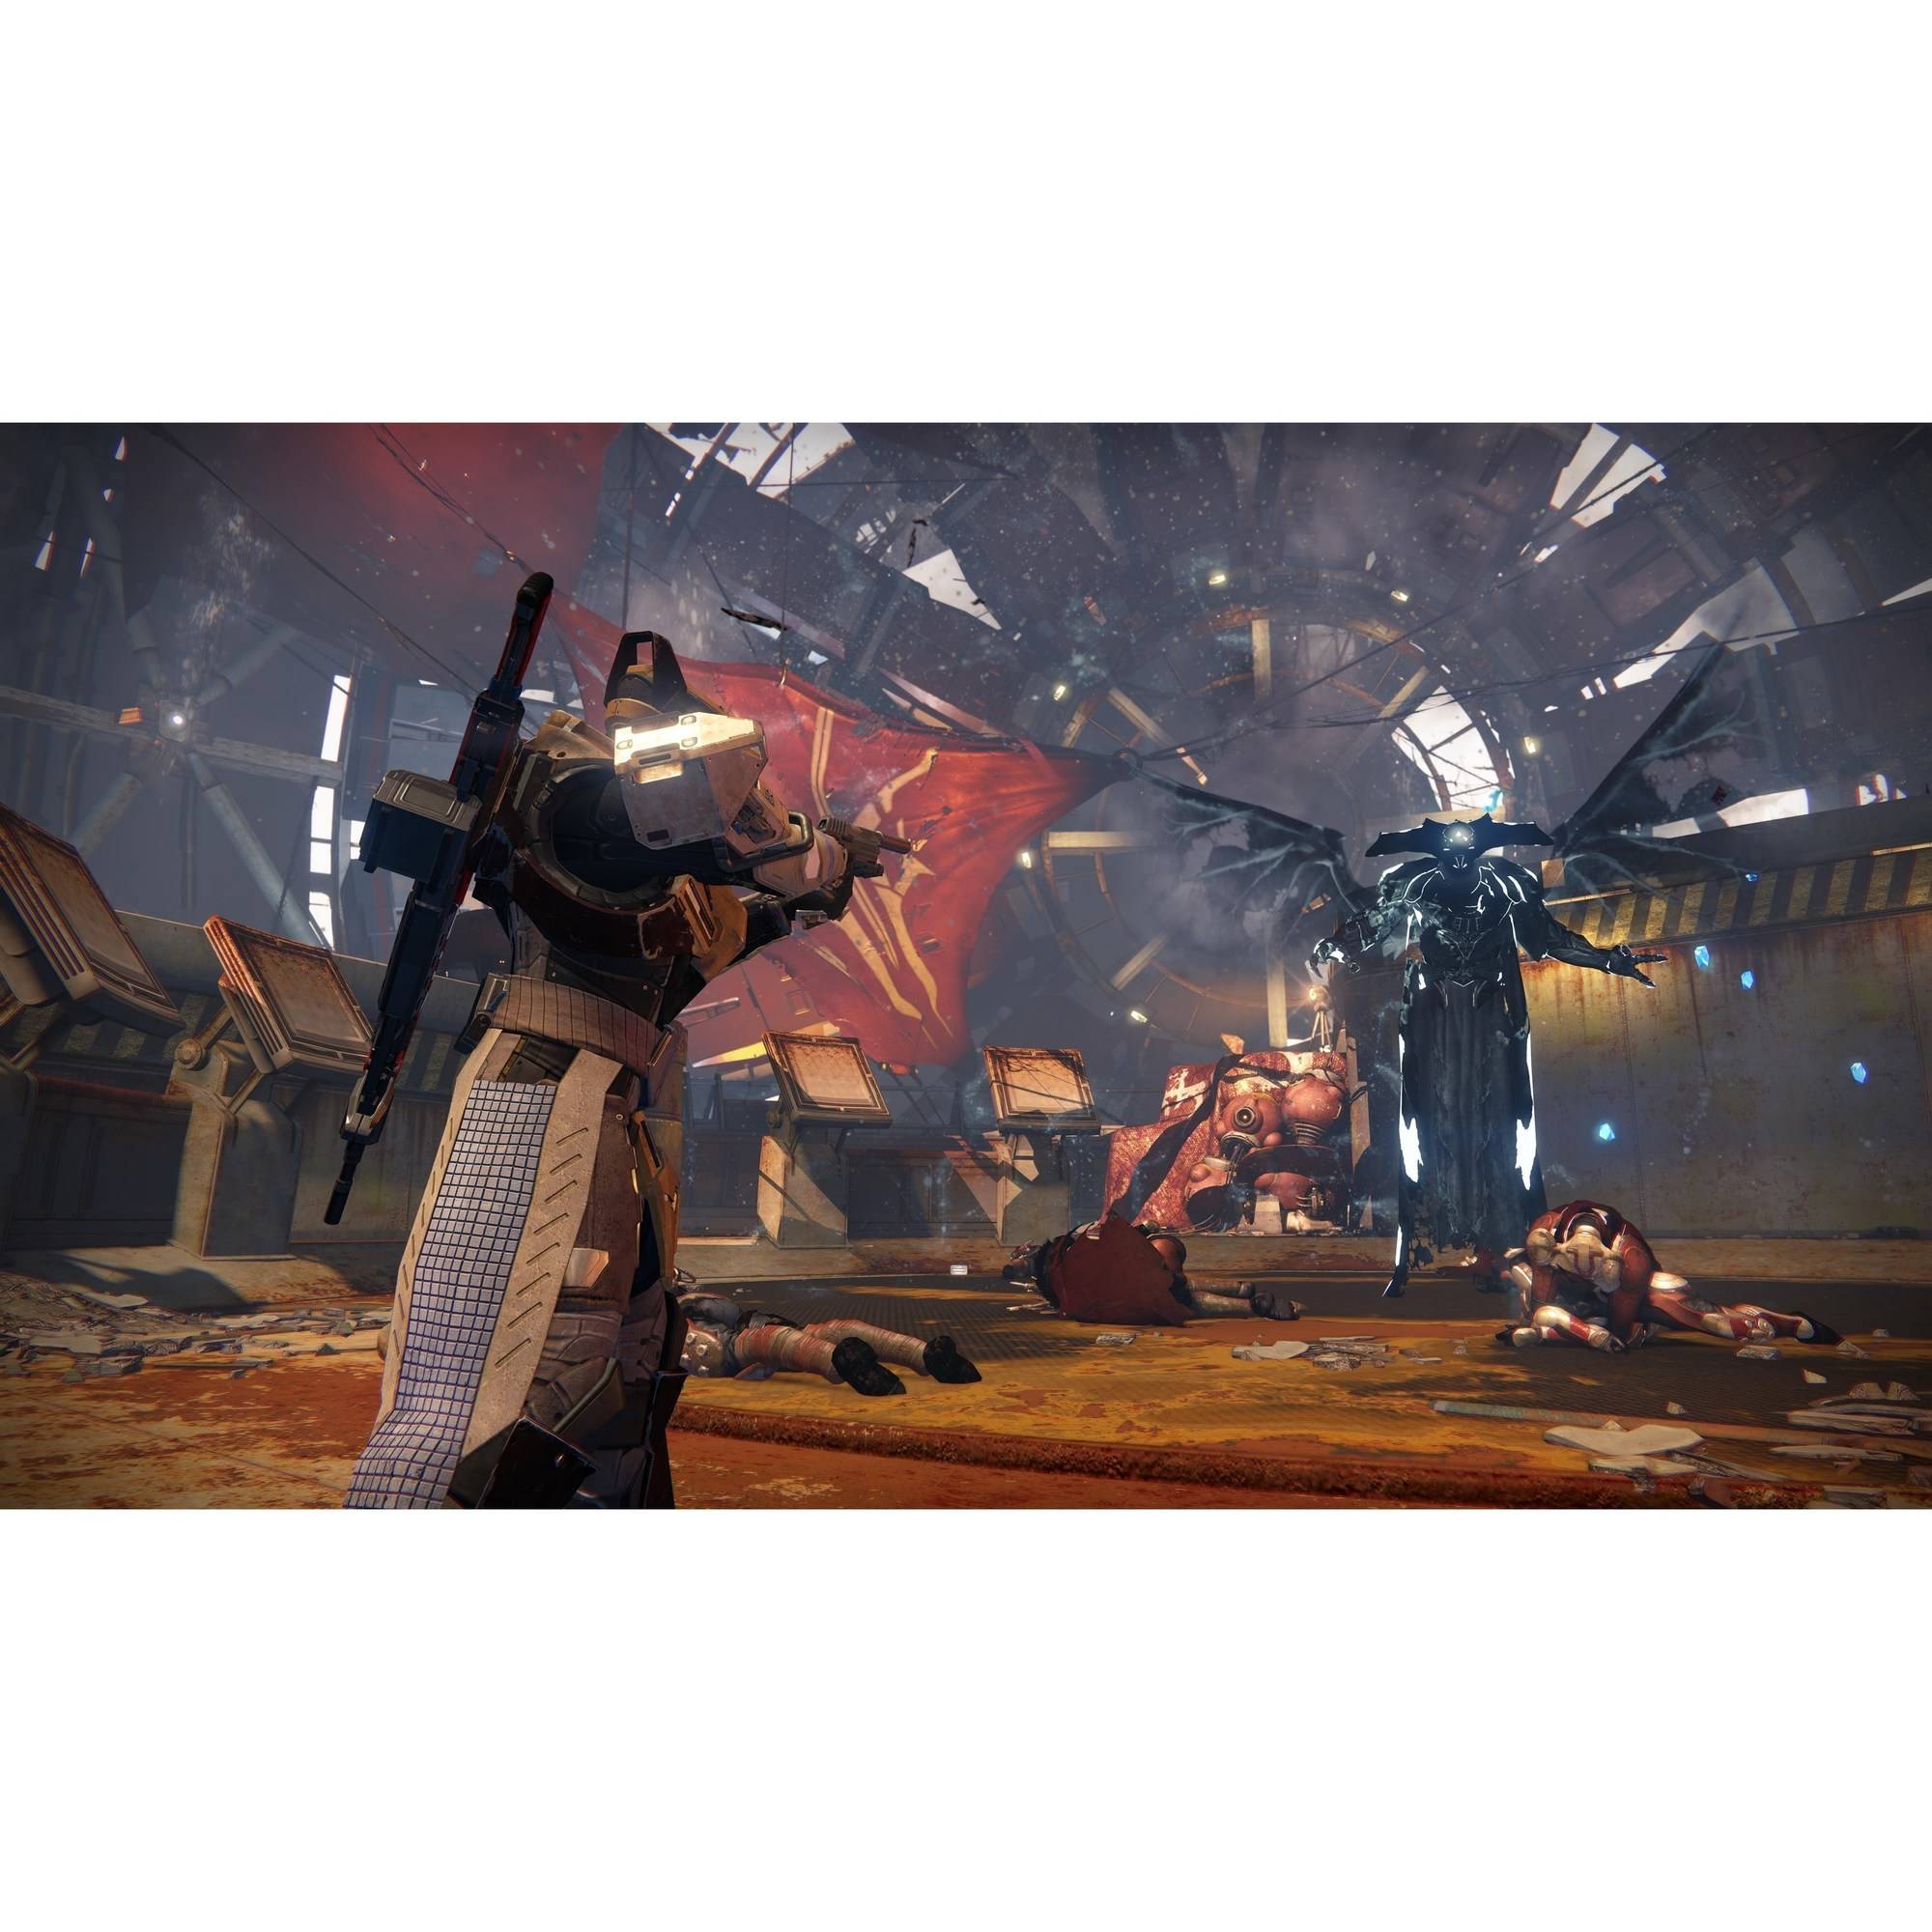 Destiny: The Taken King Legendary Edition, Activision, PlayStation 4, 047875874428 - image 2 of 31